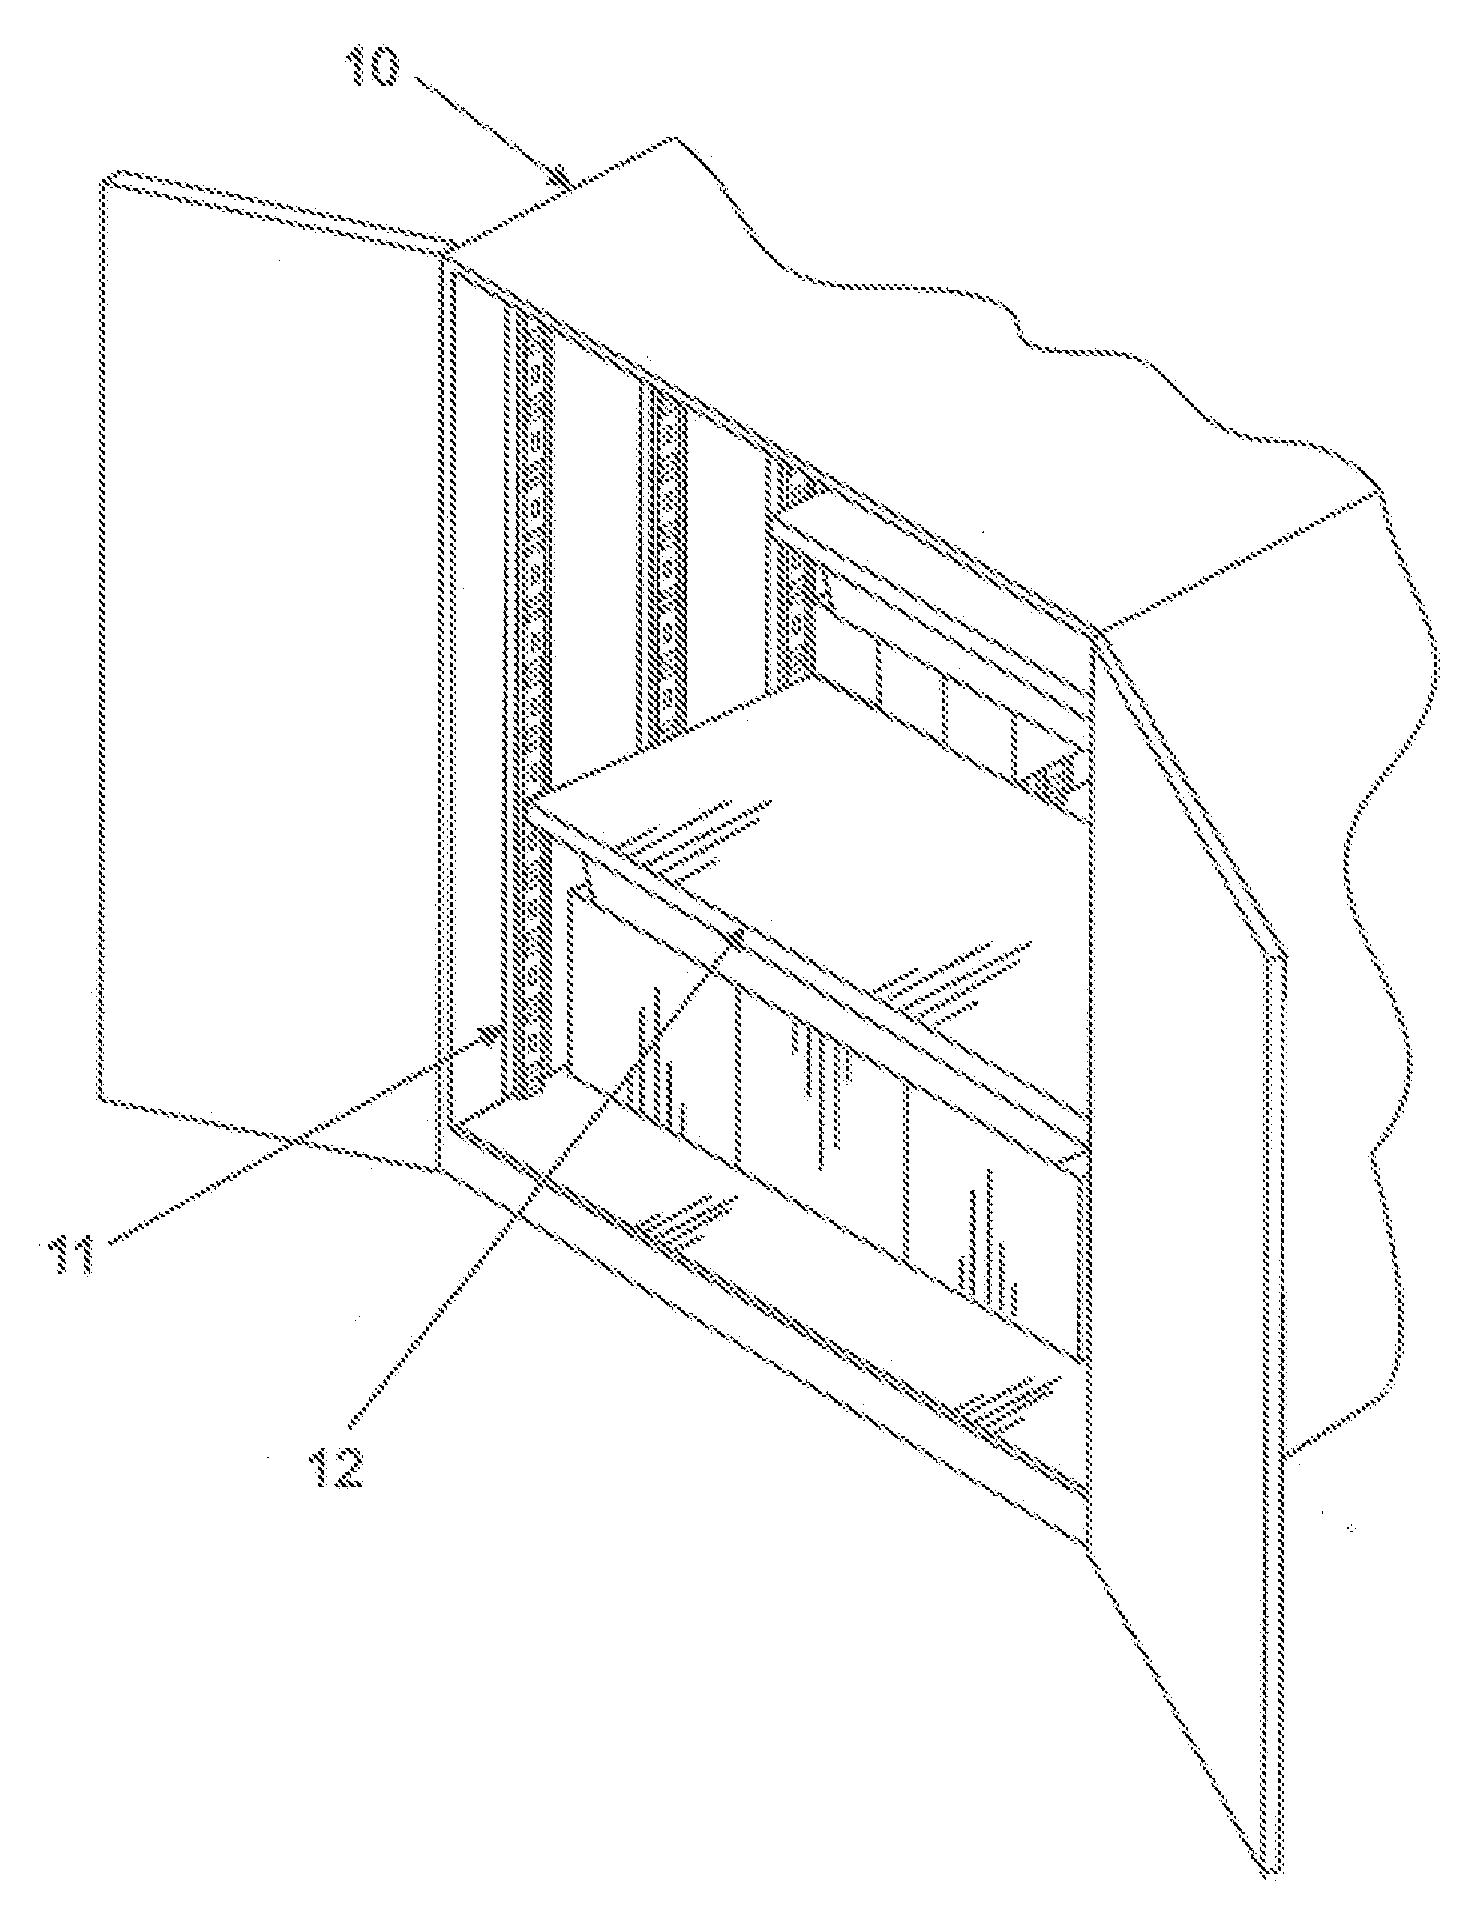 Apparatus and Method for Protecting Products from Damage During Shipment